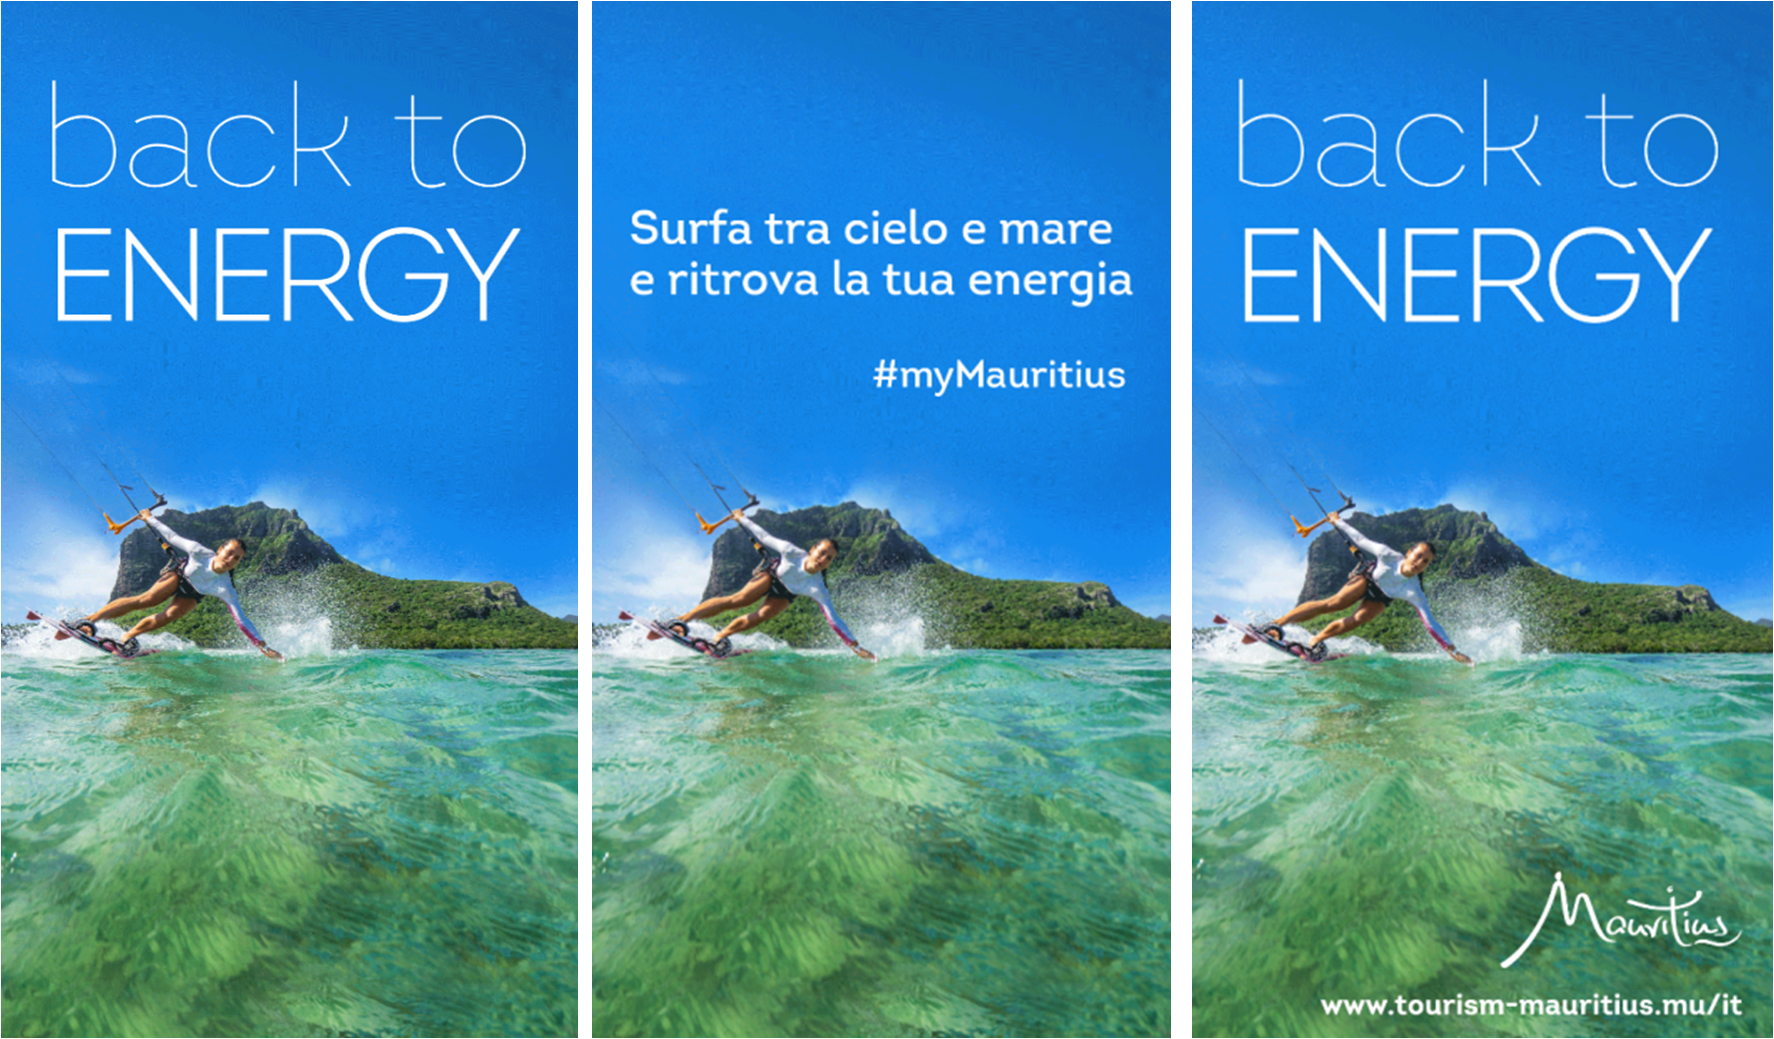 AIGO LAUNCHES THE NEW ADVERTISING CAMPAIGN TO PROMOTE THE ISLAND OF MAURITIUS